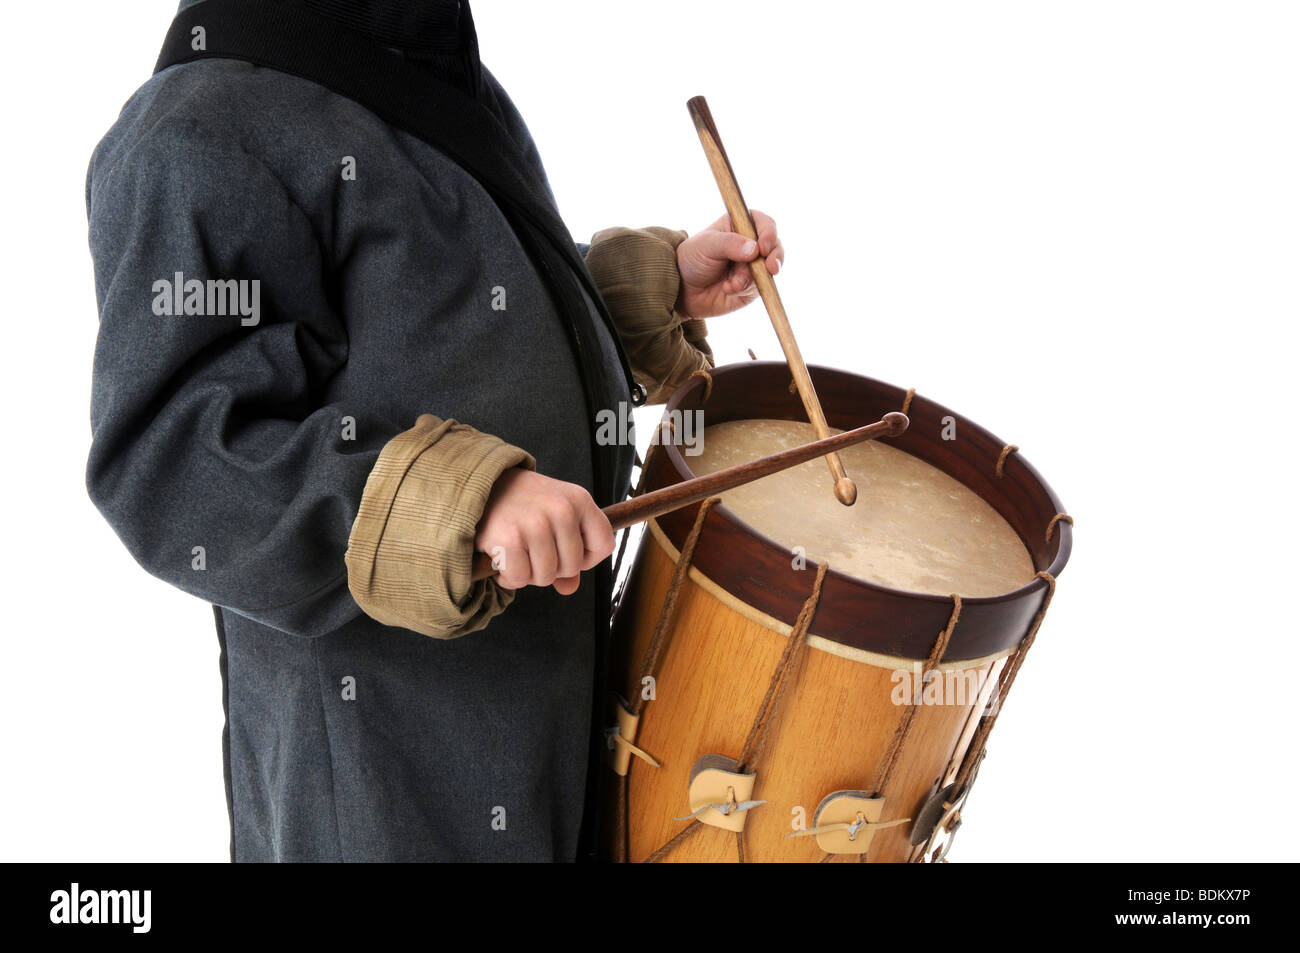 Drummer boy playing over a white background Banque D'Images